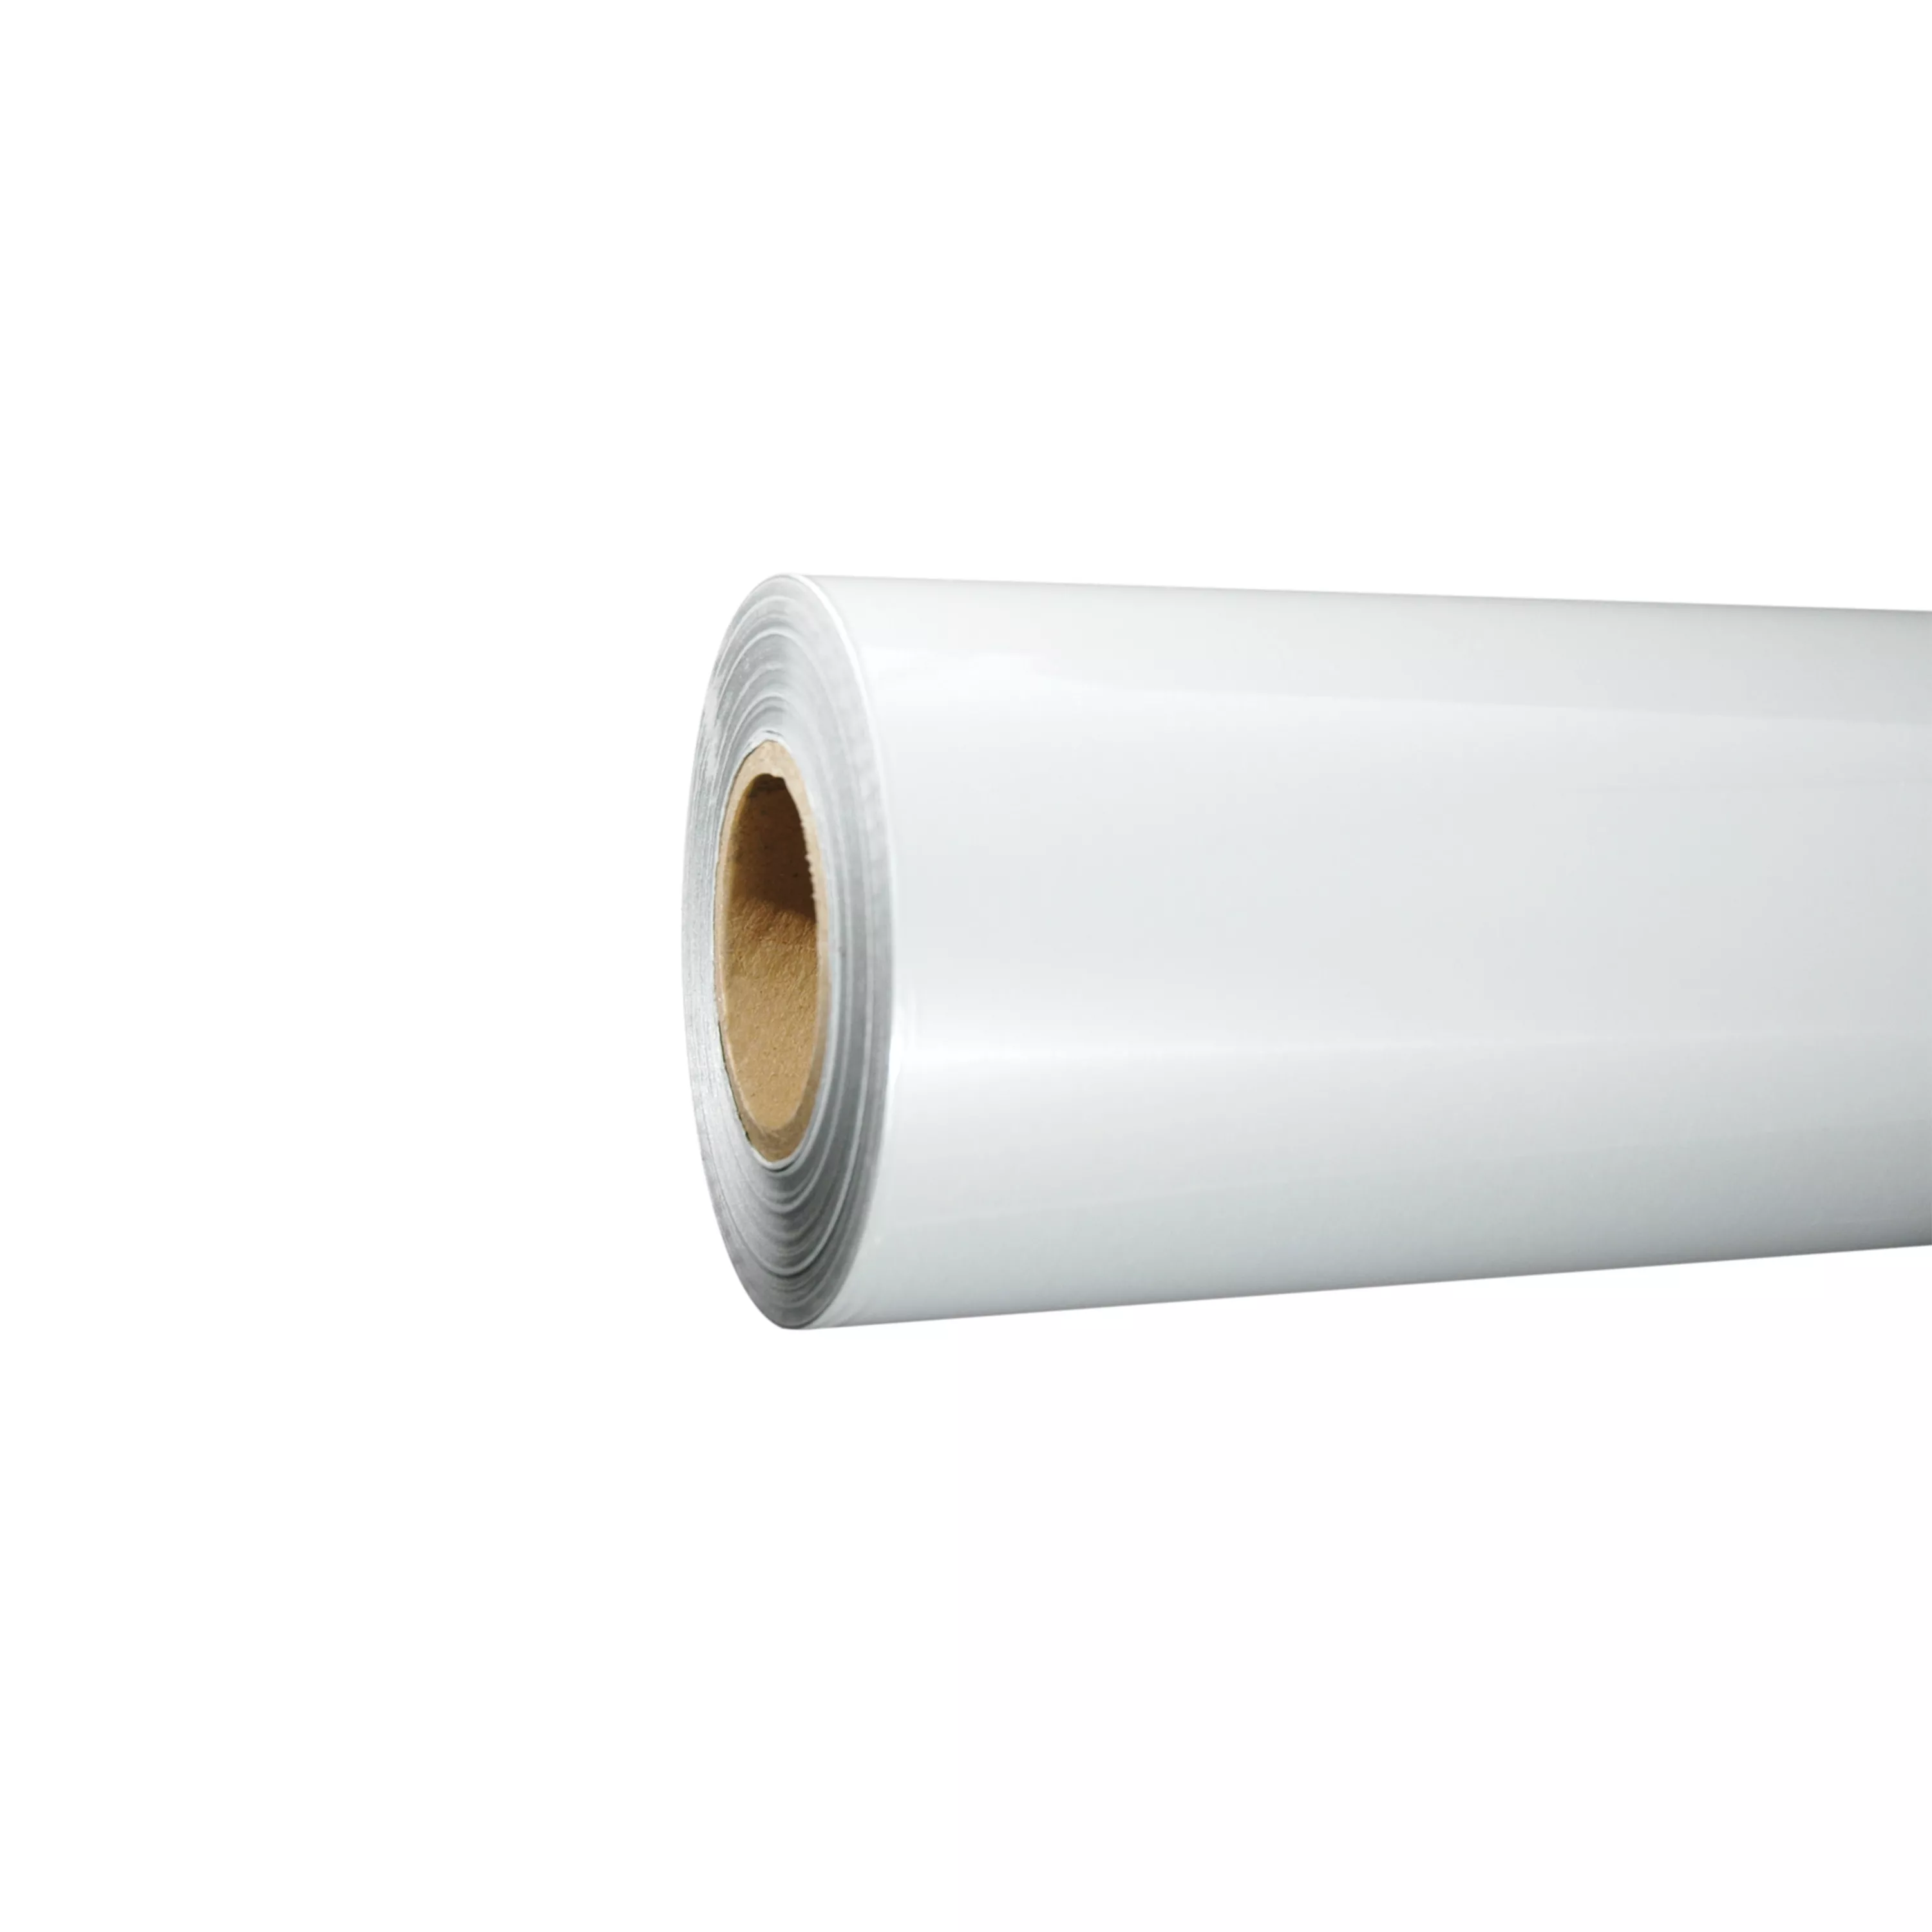 3M™ Venture Tape™ Non-Adhesive Cryogenic Jacketing 1555U, Silver, 35 1/2
in x 250 yd, 42 rolls per pallet (1 roll per case)